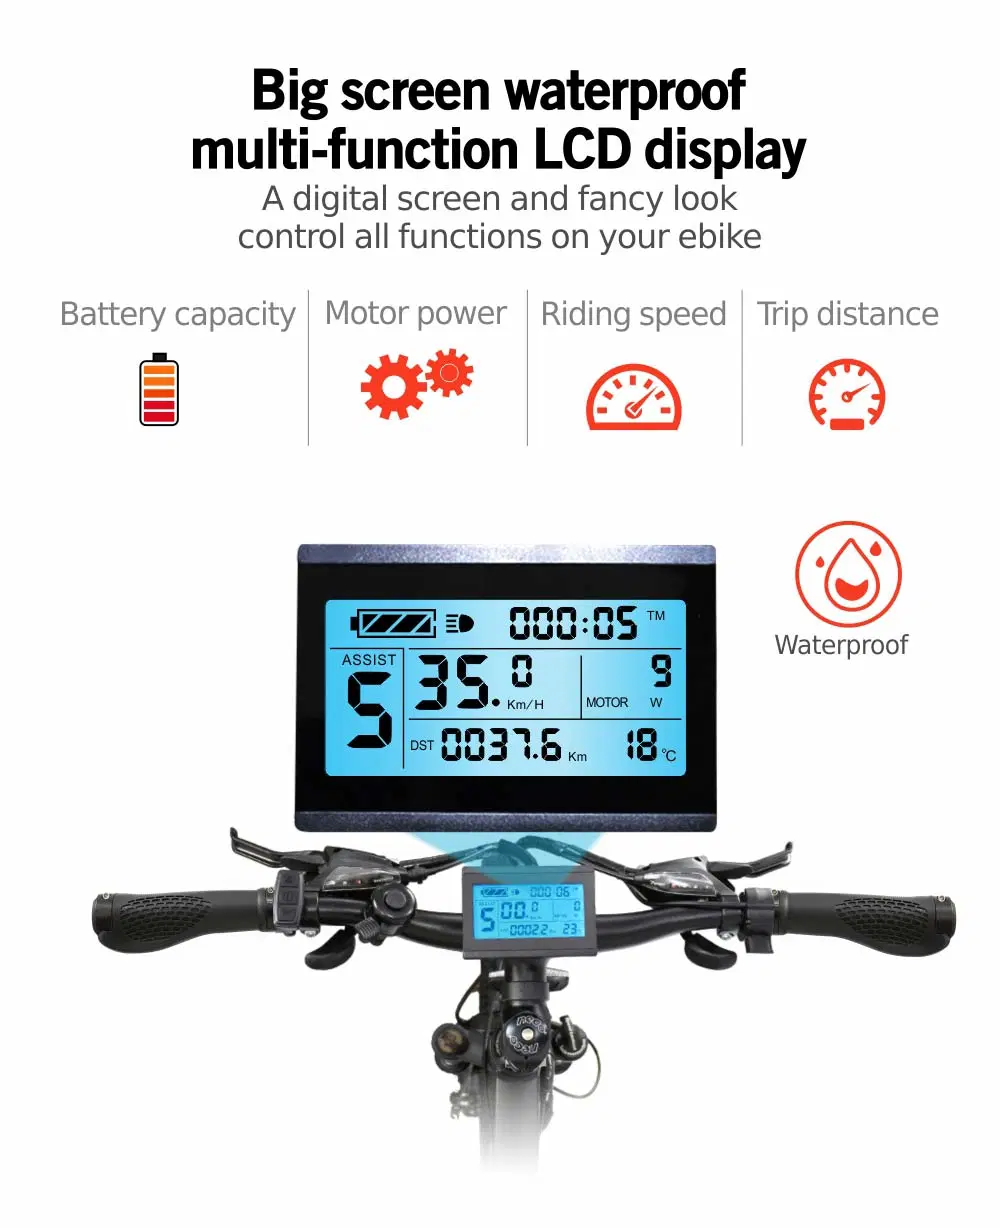 Wholesale Multifunctional Electric Bicycle 36V 25W Mountain Bike 26inch